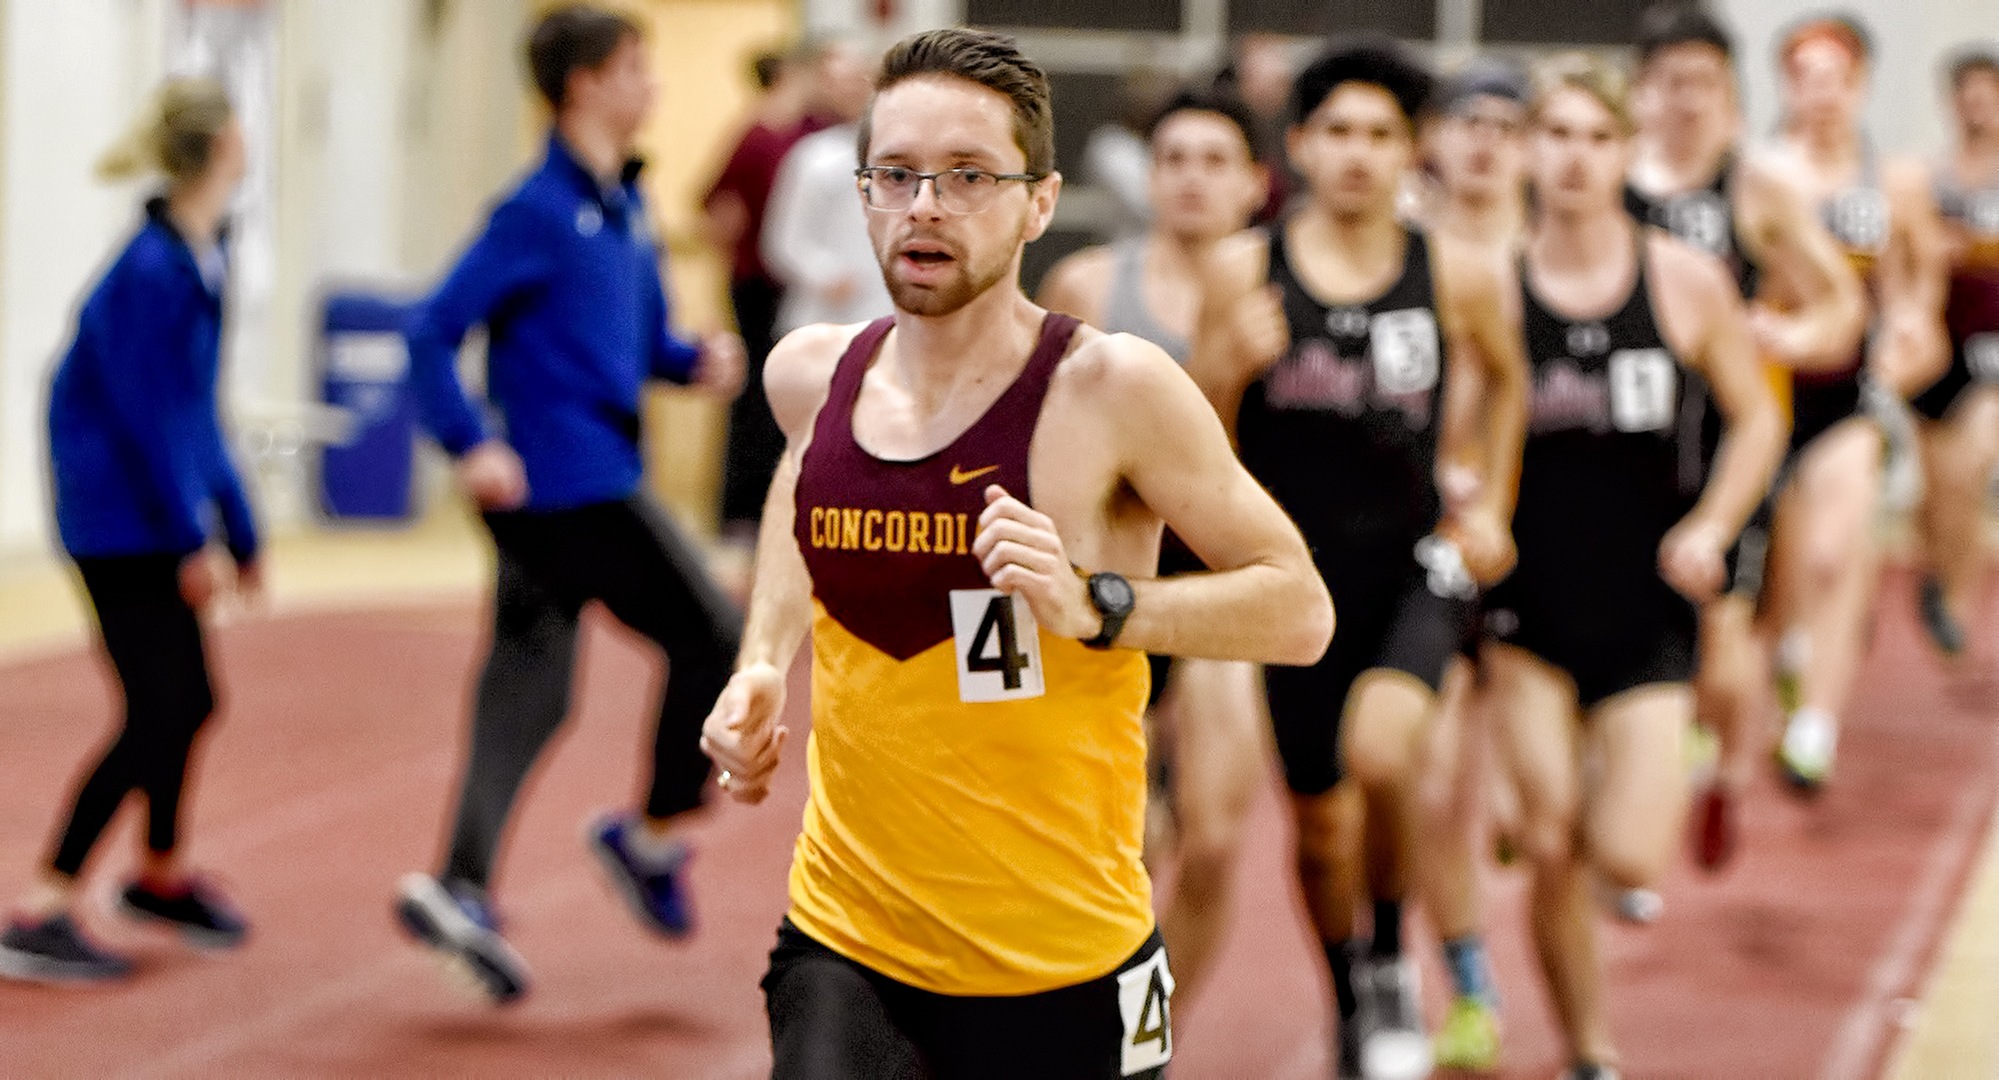 Senior Eric Wicklund won the 5000 meters at the St. John's Invite and has now won an event in three of the four meets this season.